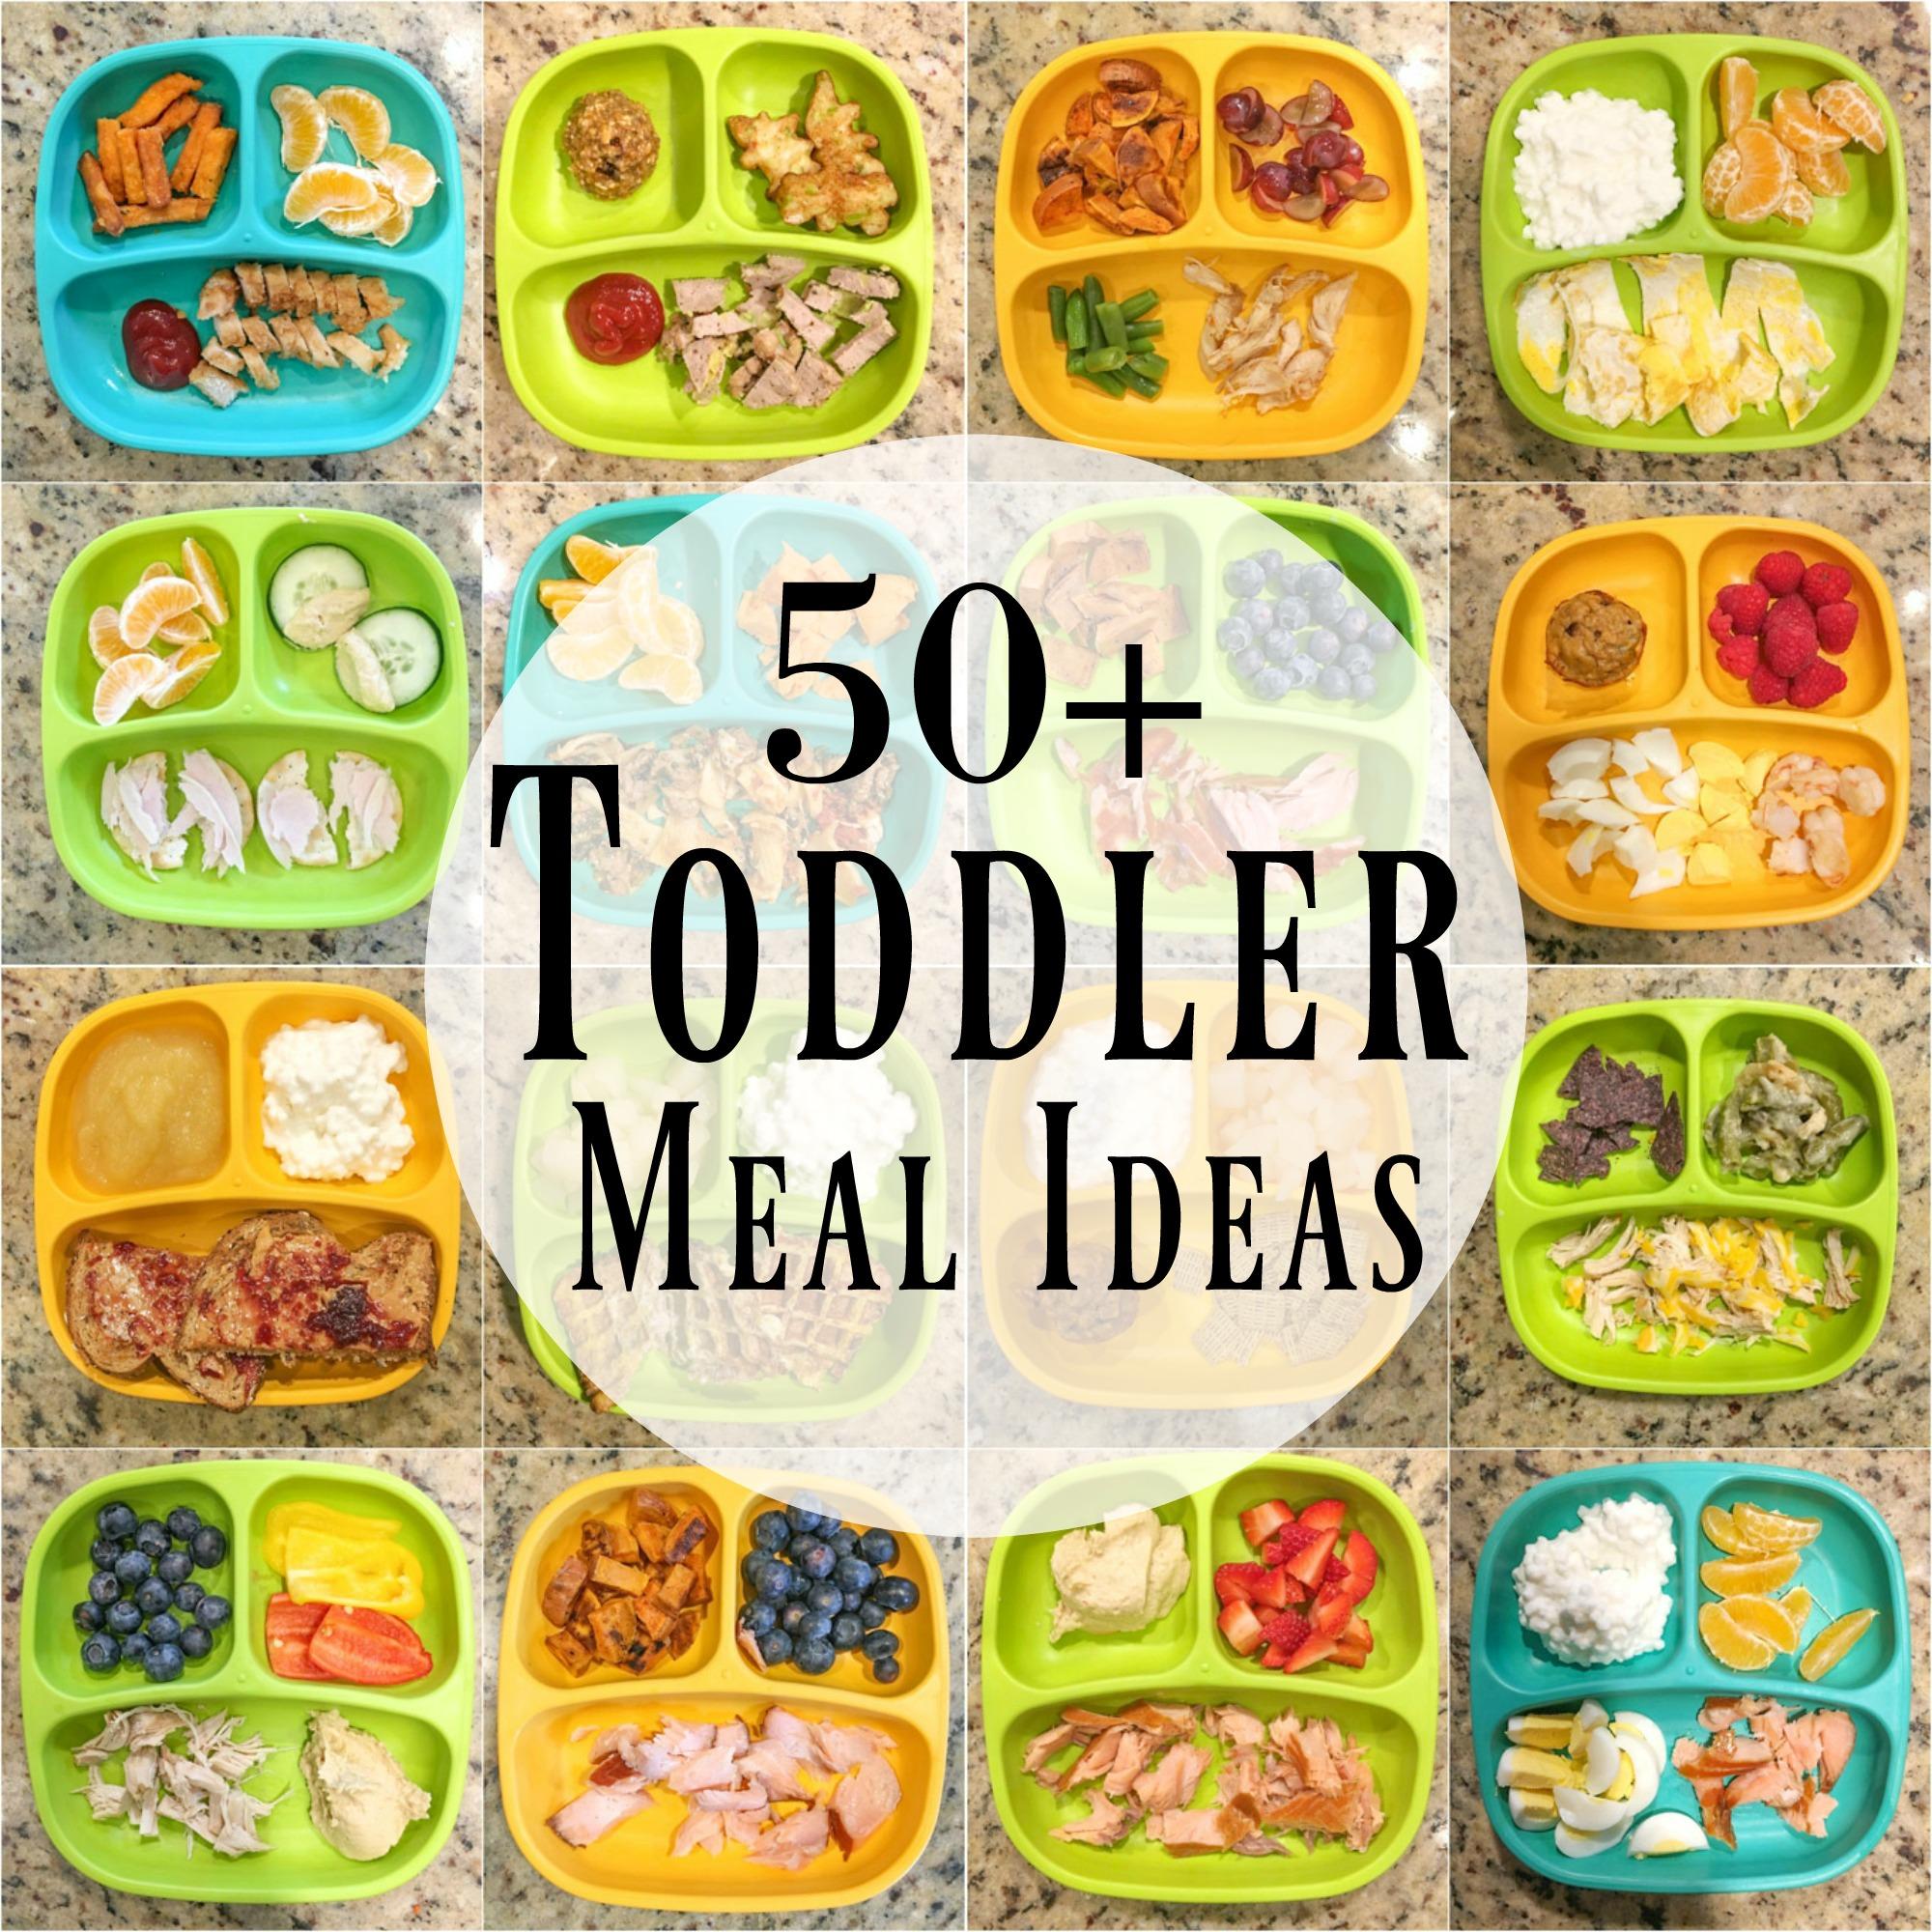 Need some healthy toddler meal ideas? Here are 50 kid-friendly ideas for breakfast, lunch and dinner to help inspire you if you’re stuck in a rut!